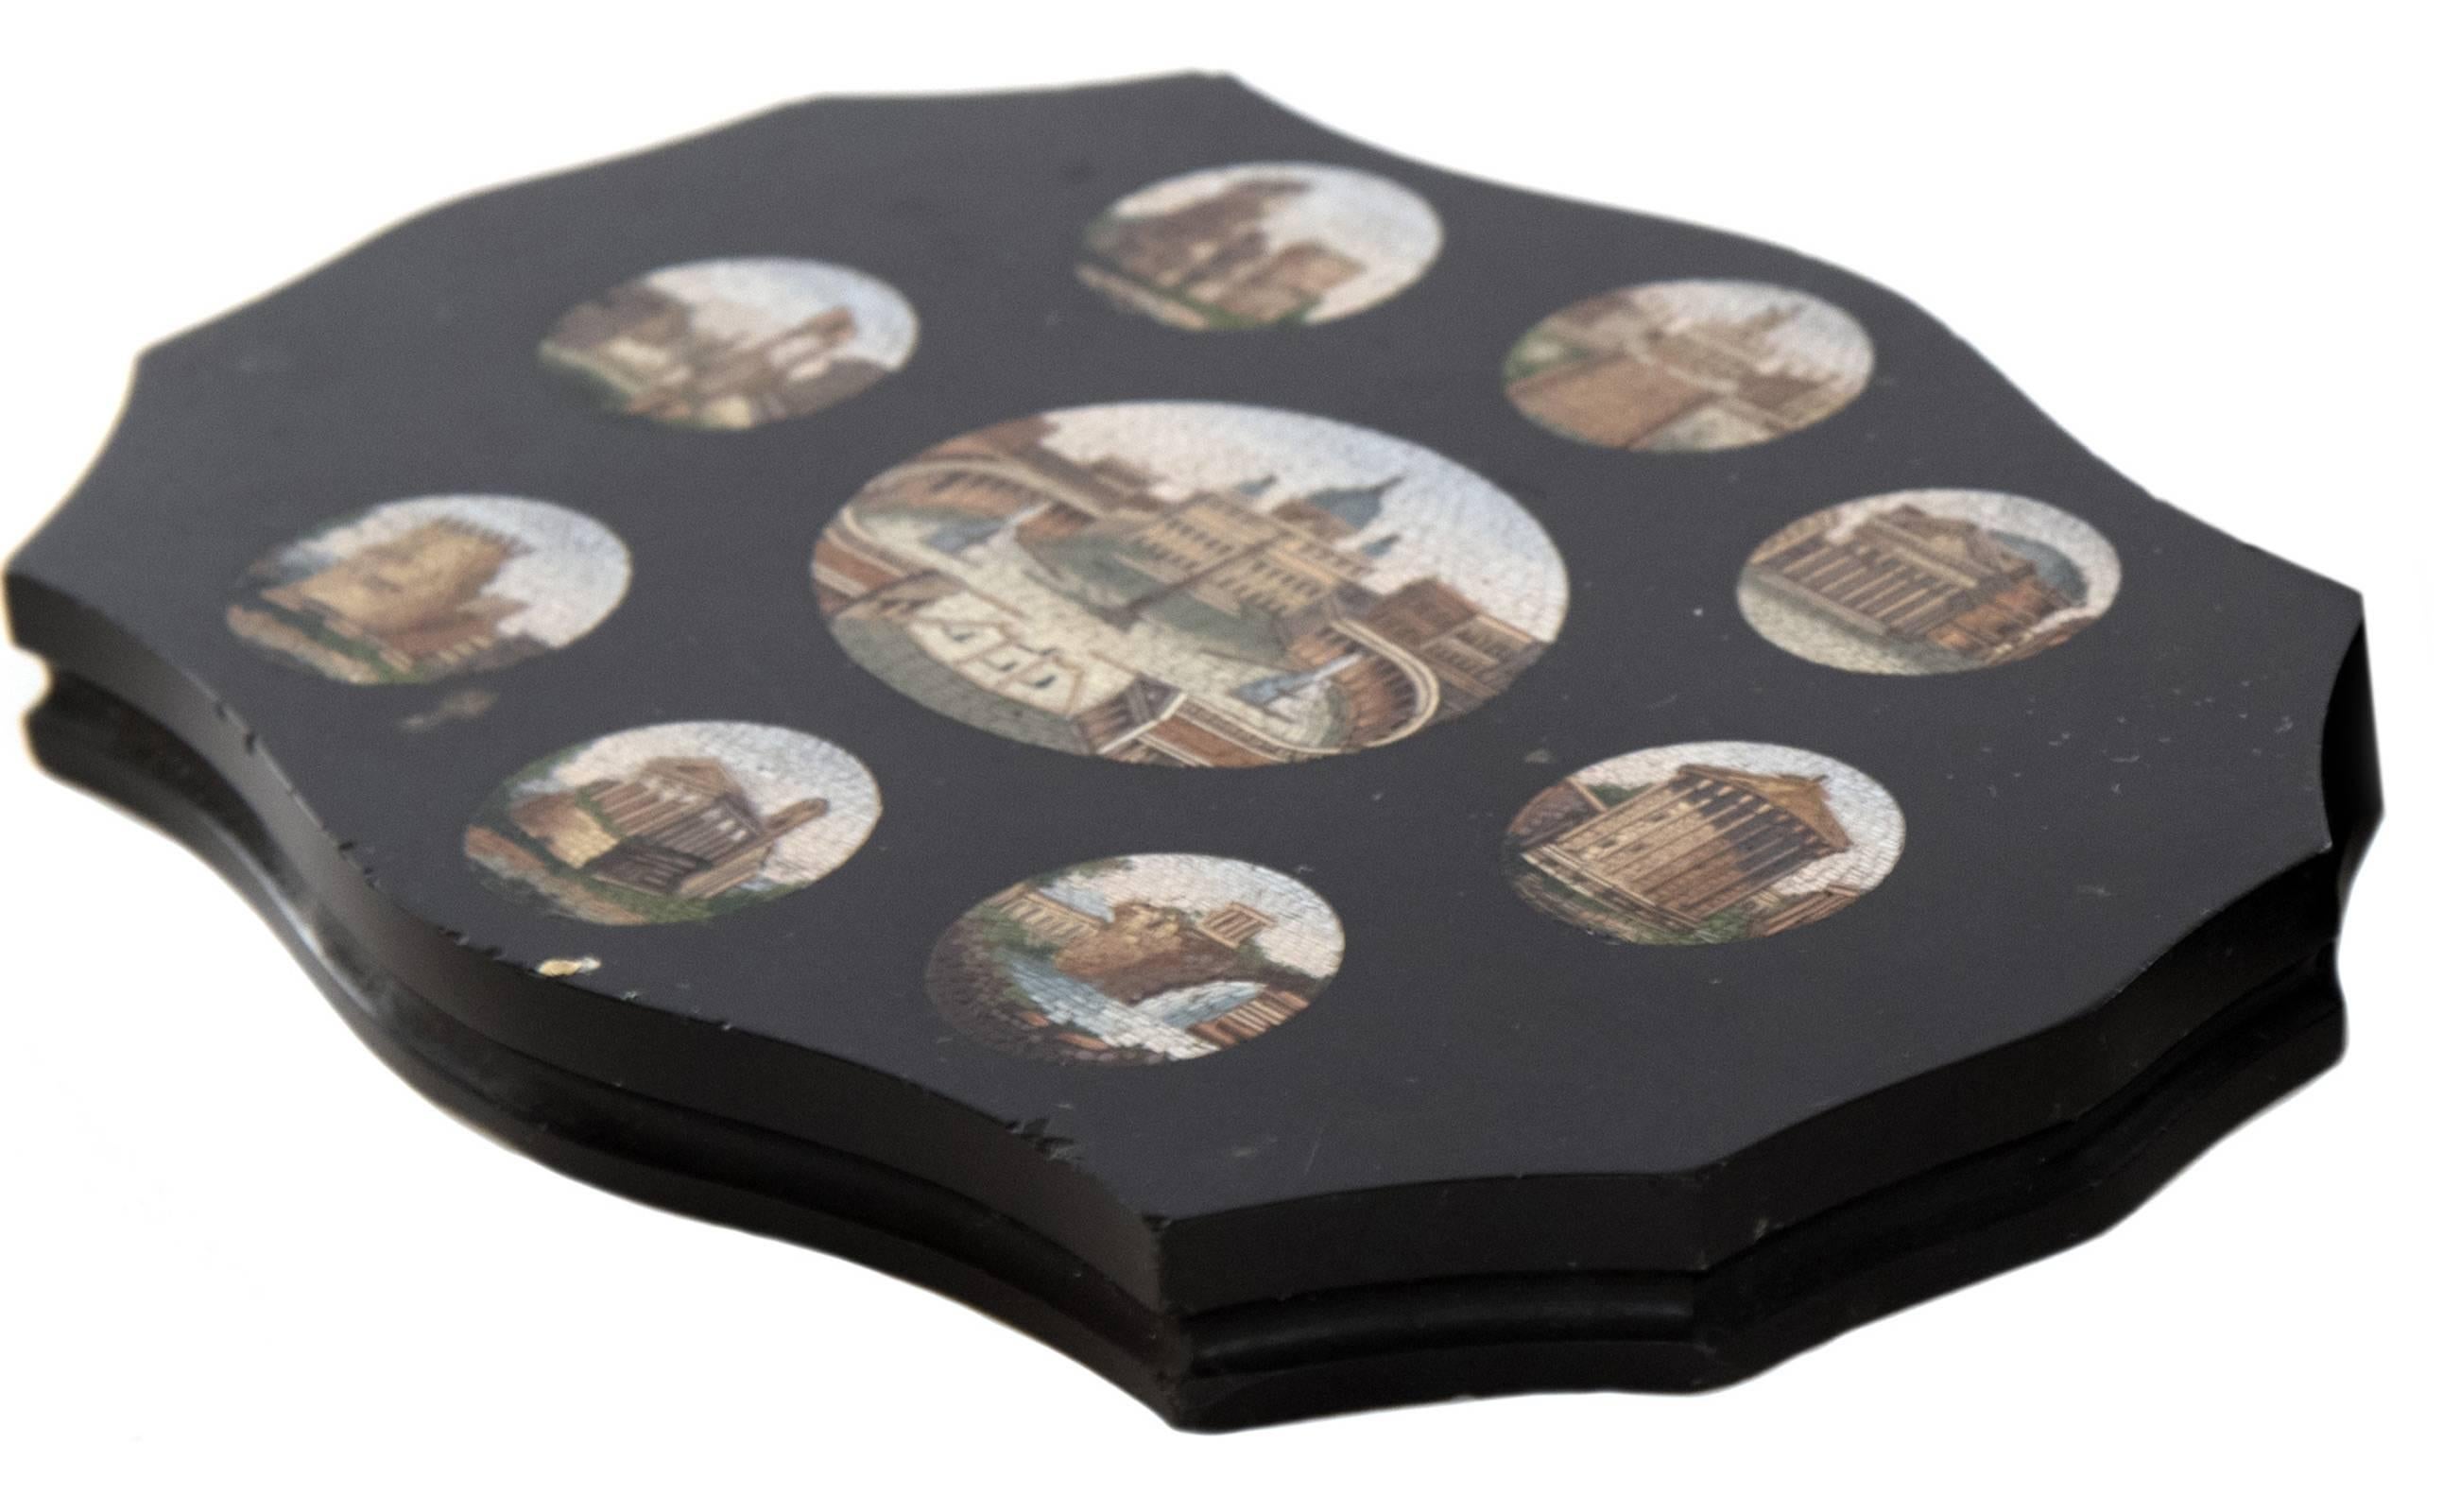 A Grand Tour micromosaic paper weight depicting vignettes of historical Roman architectural landmarks, set within scalloped black marble form. In the centre is a large roundel depicting St. Peter's Basilica, which is surrounded by smaller vignettes